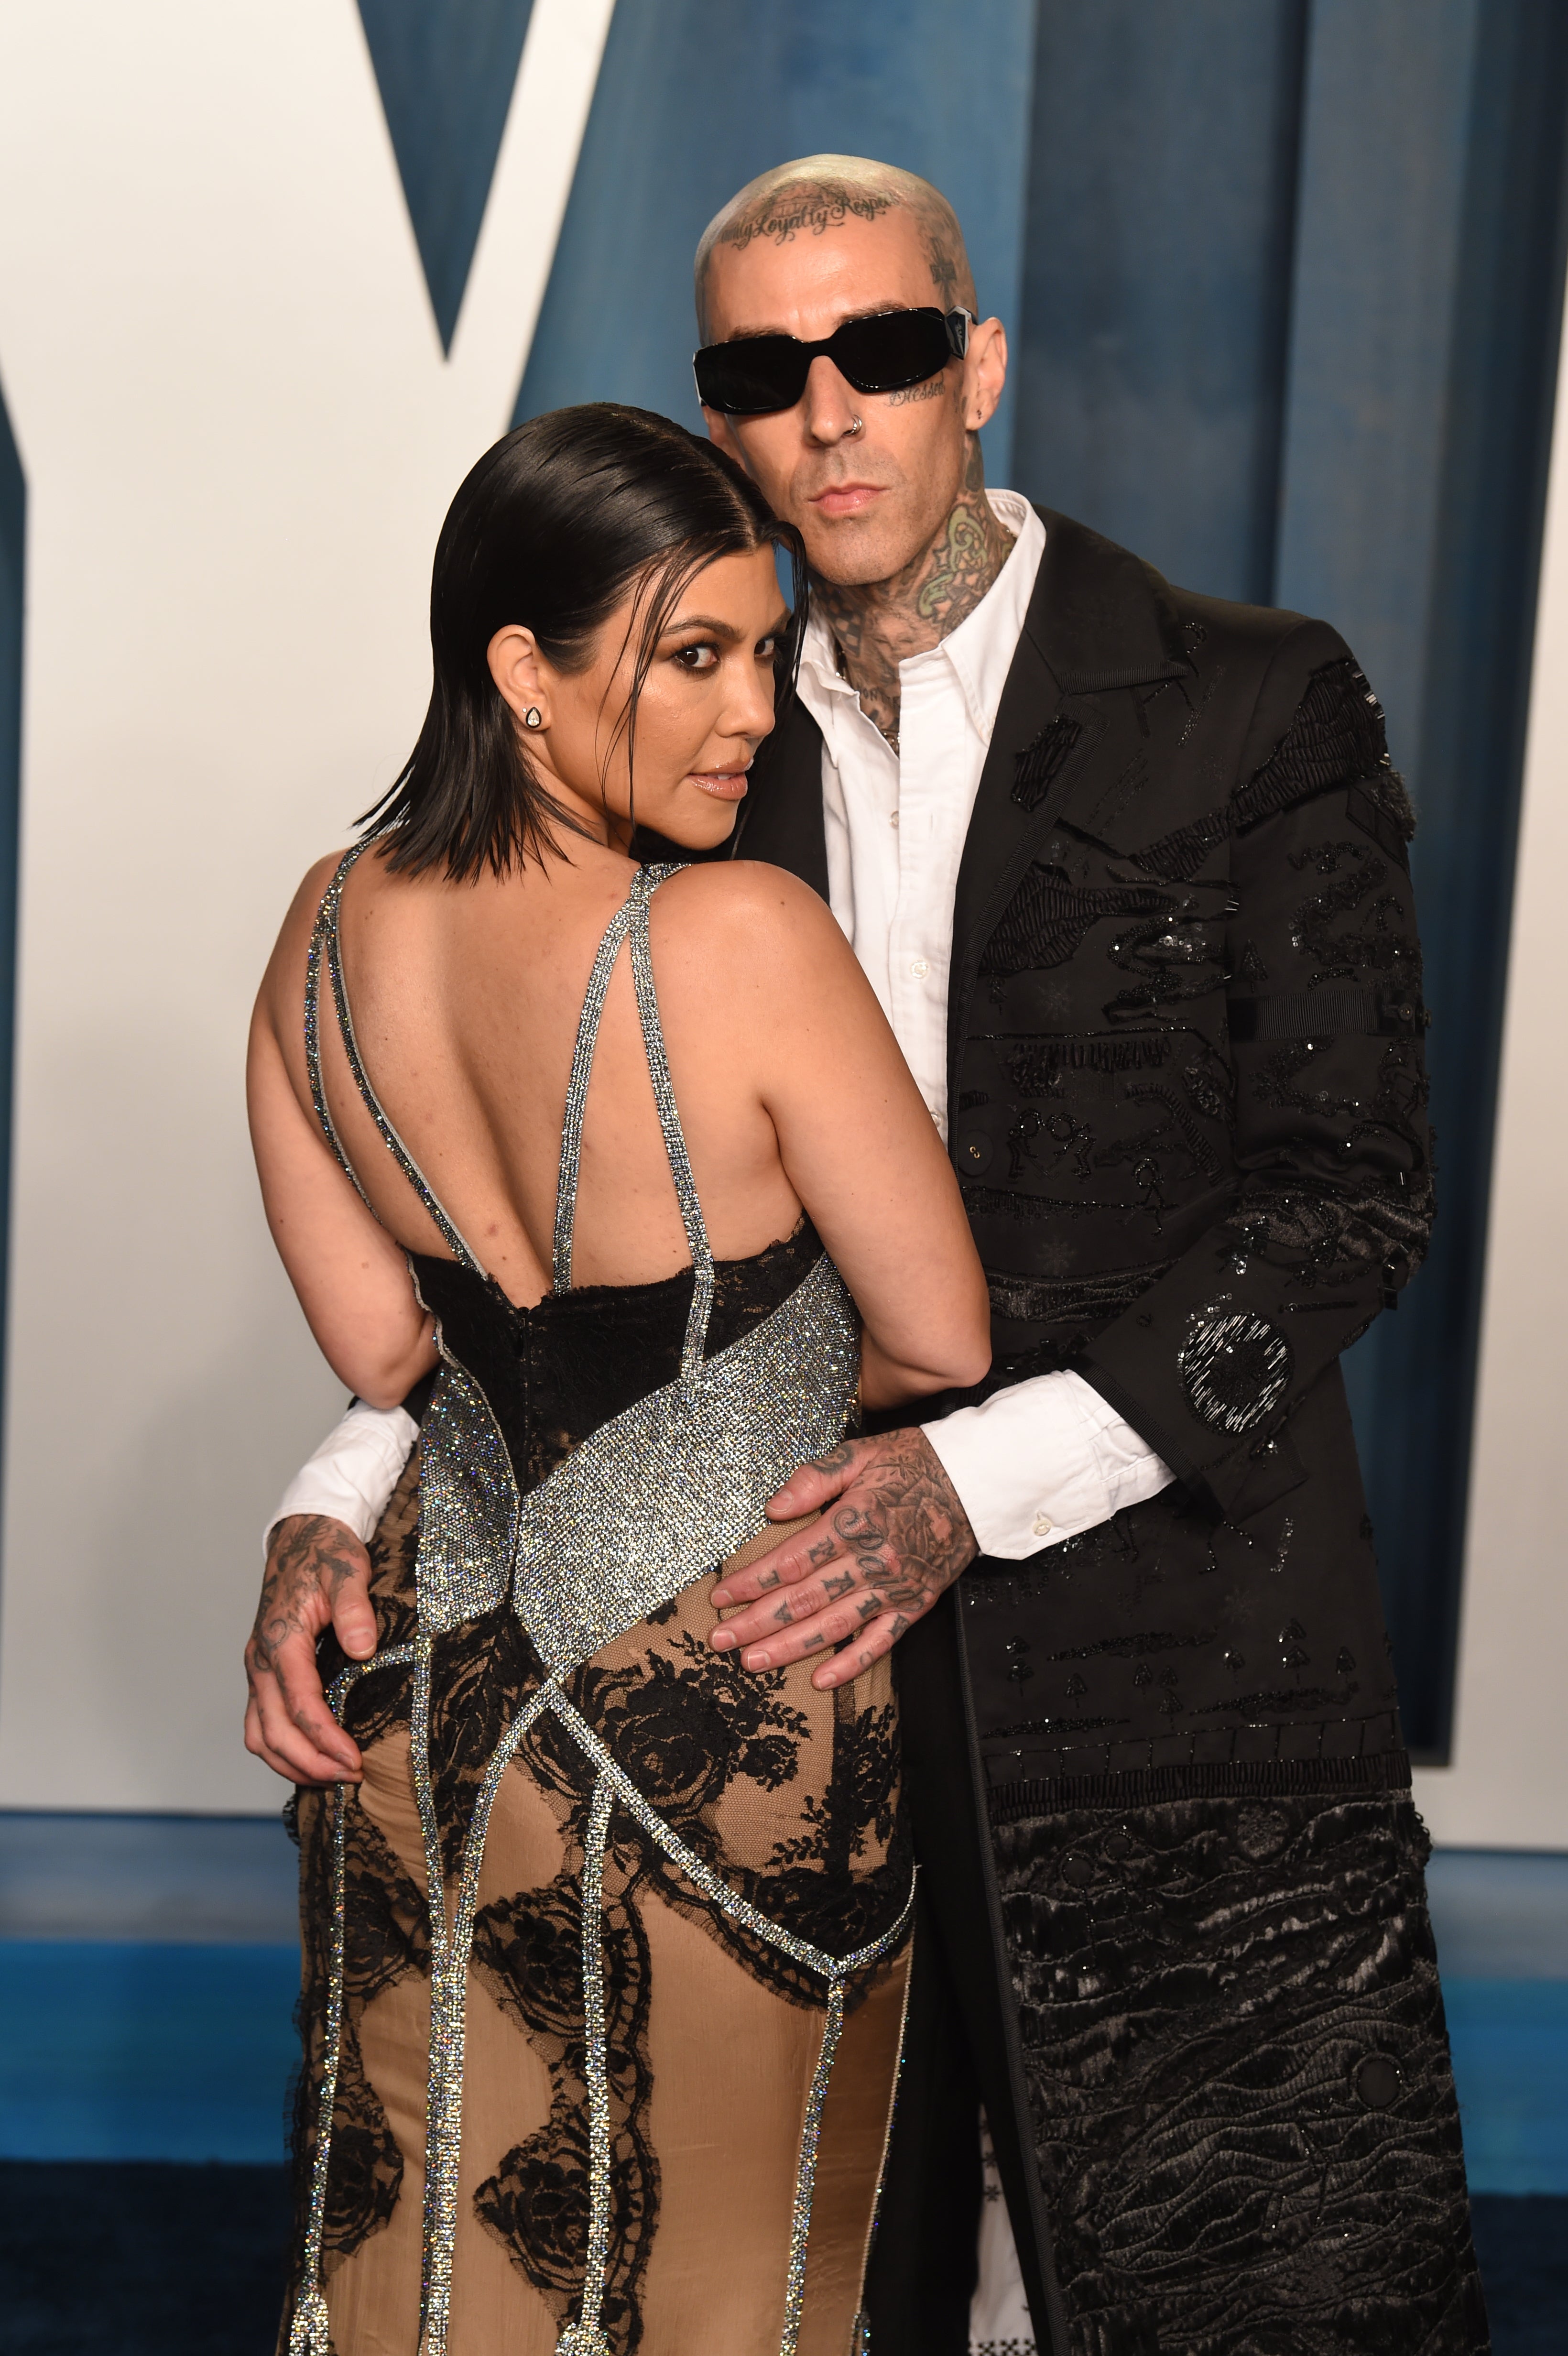 Blink-182 drummer Travis Barker is to married reality star Kourtney Kardashian, who announced at one of the band’s shows that she was pregnant by holding up a sign